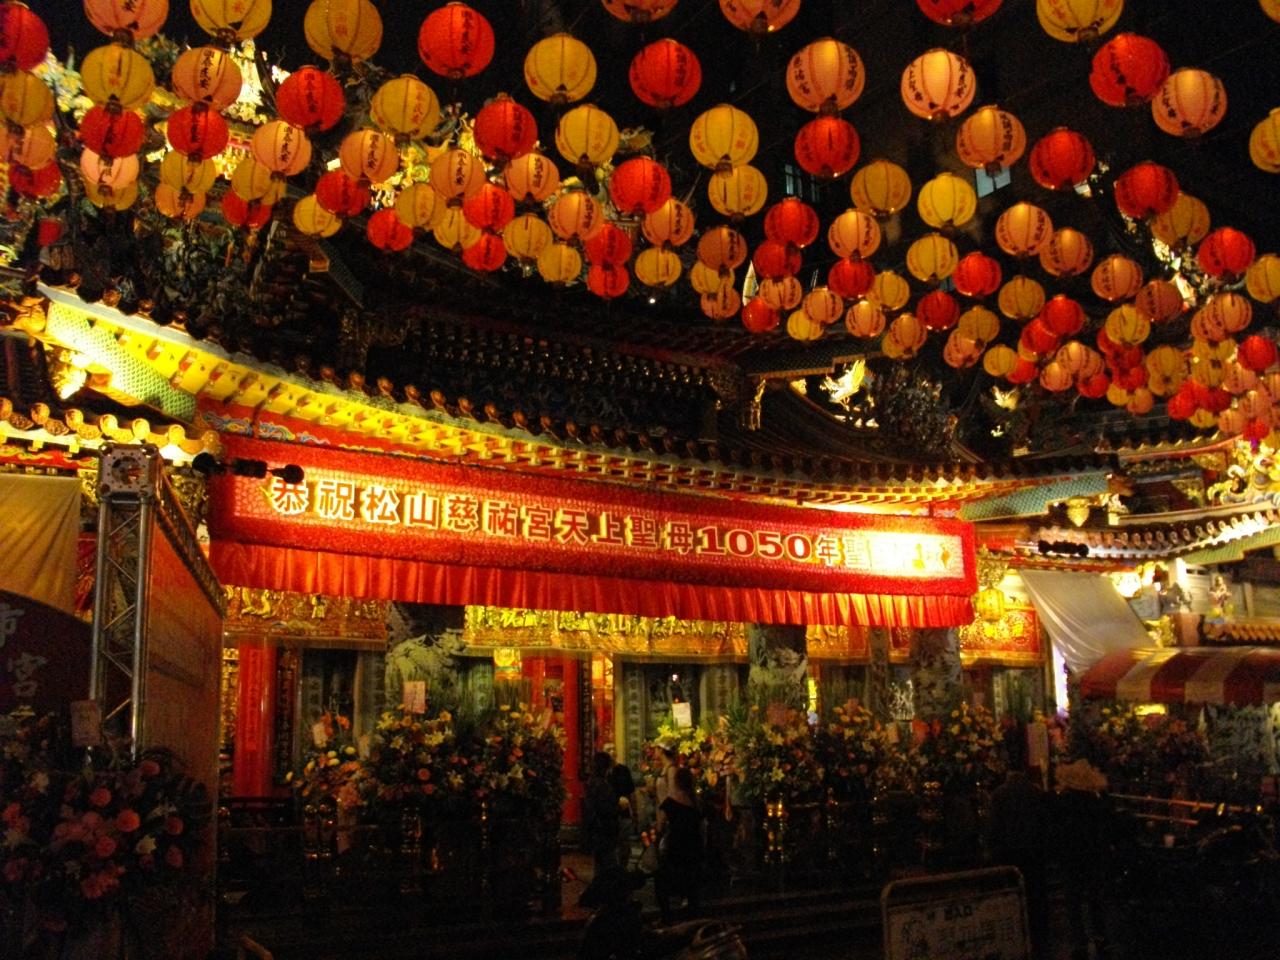 many chinese decorations are hung from the ceiling